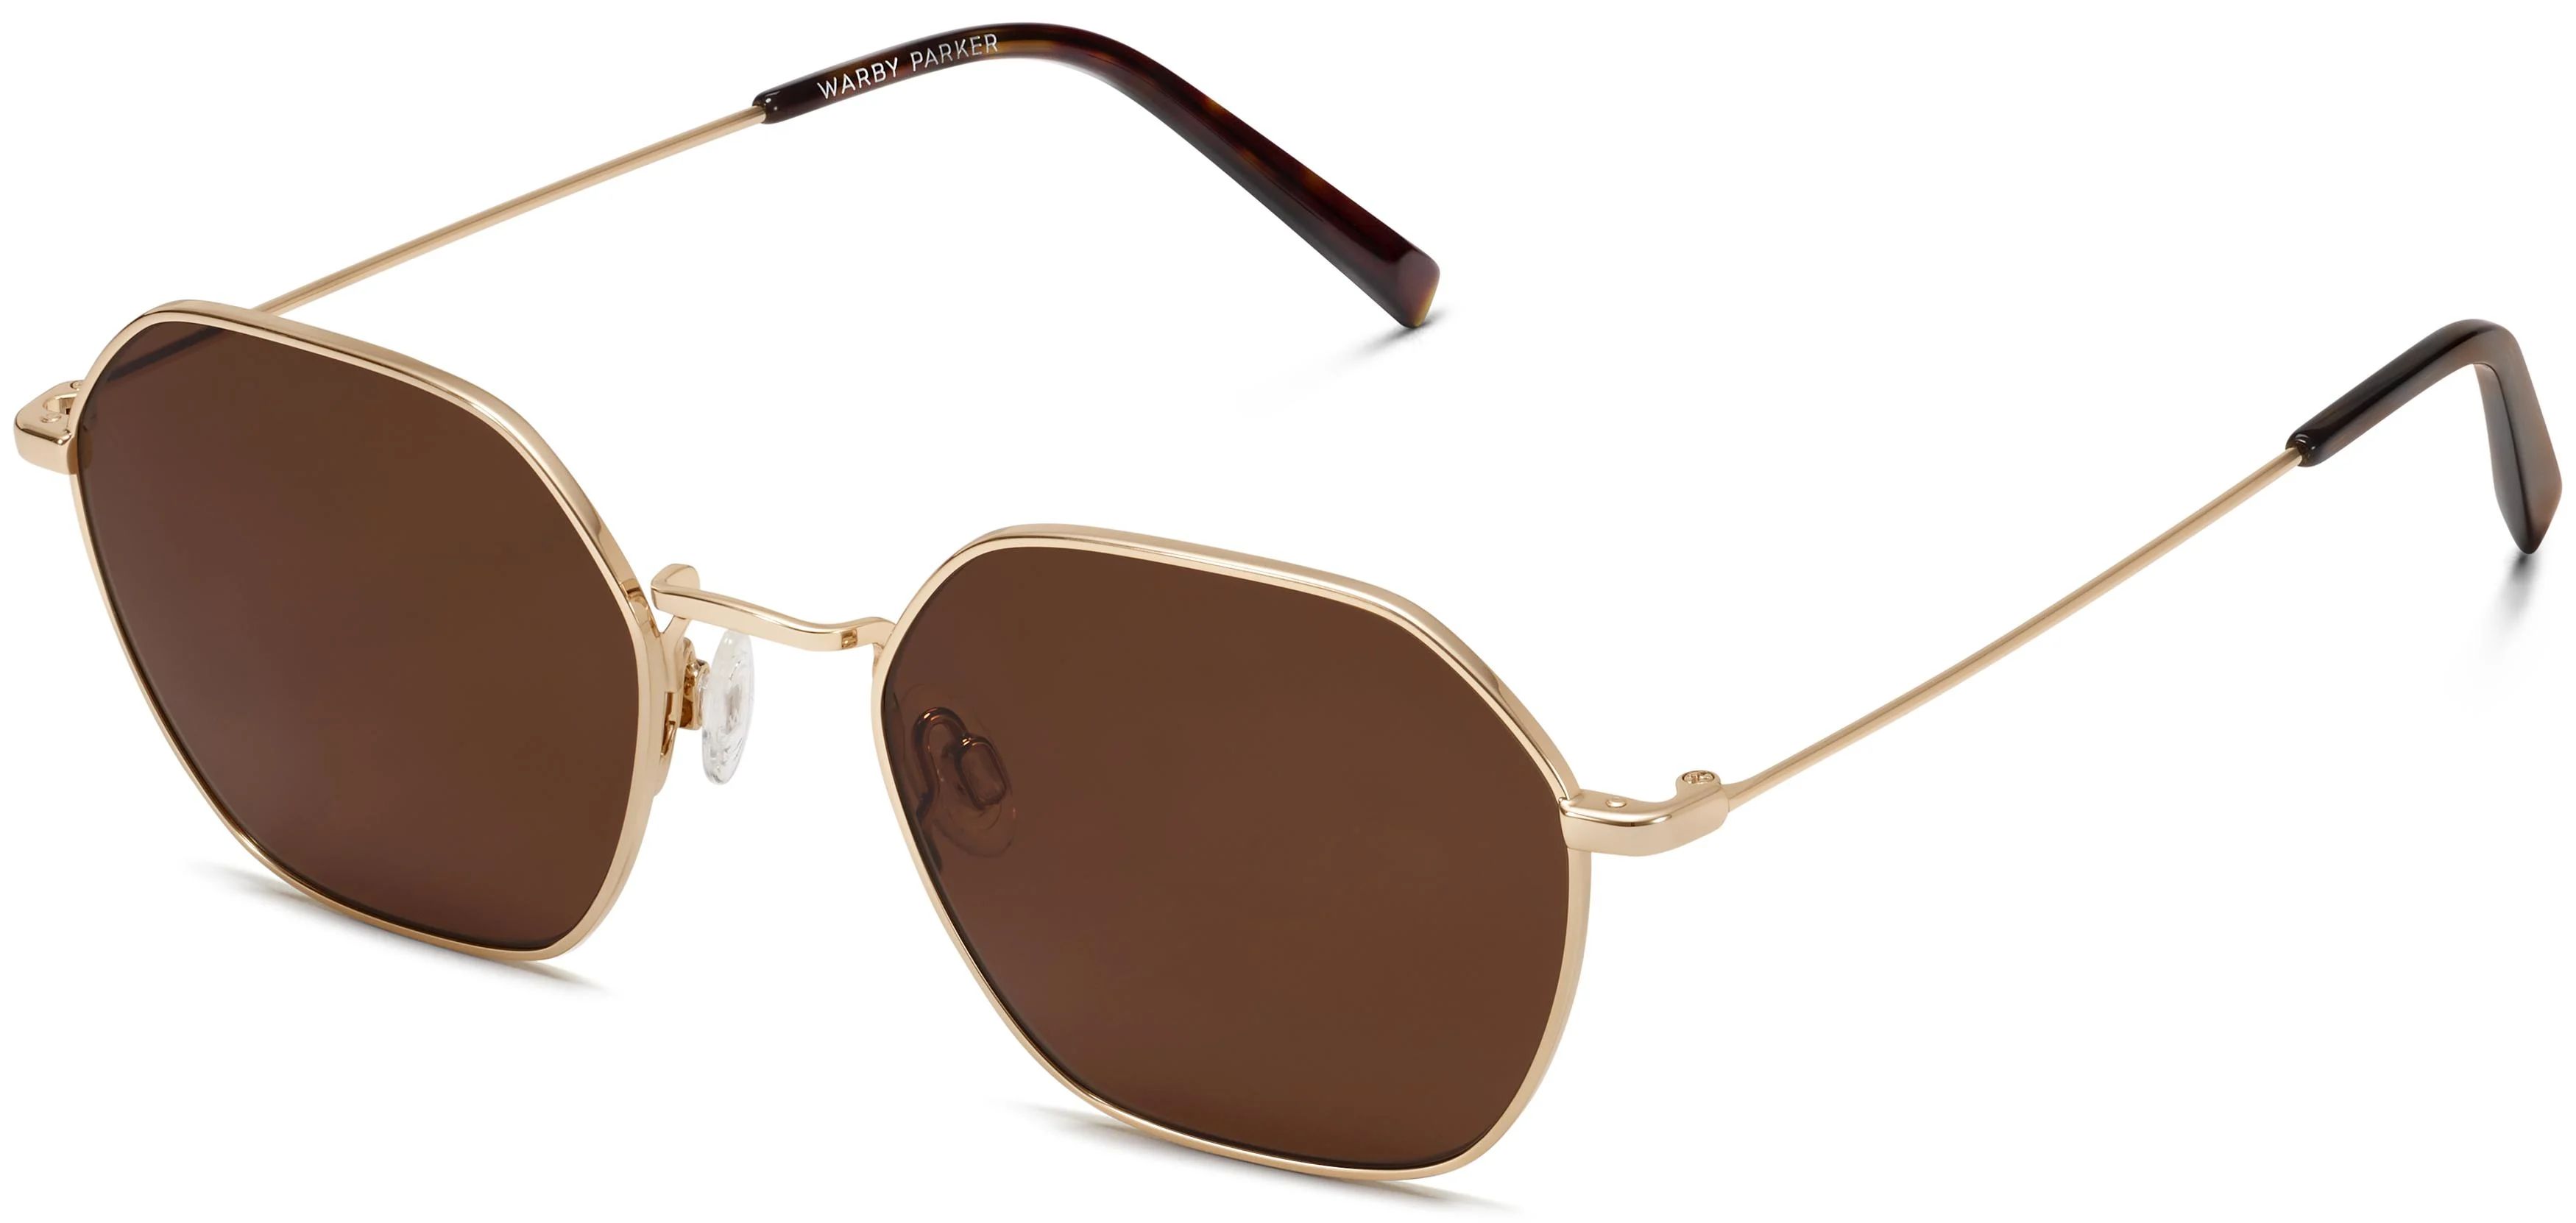 Merrick Sunglasses in Polished Gold | Warby Parker | Warby Parker (US)